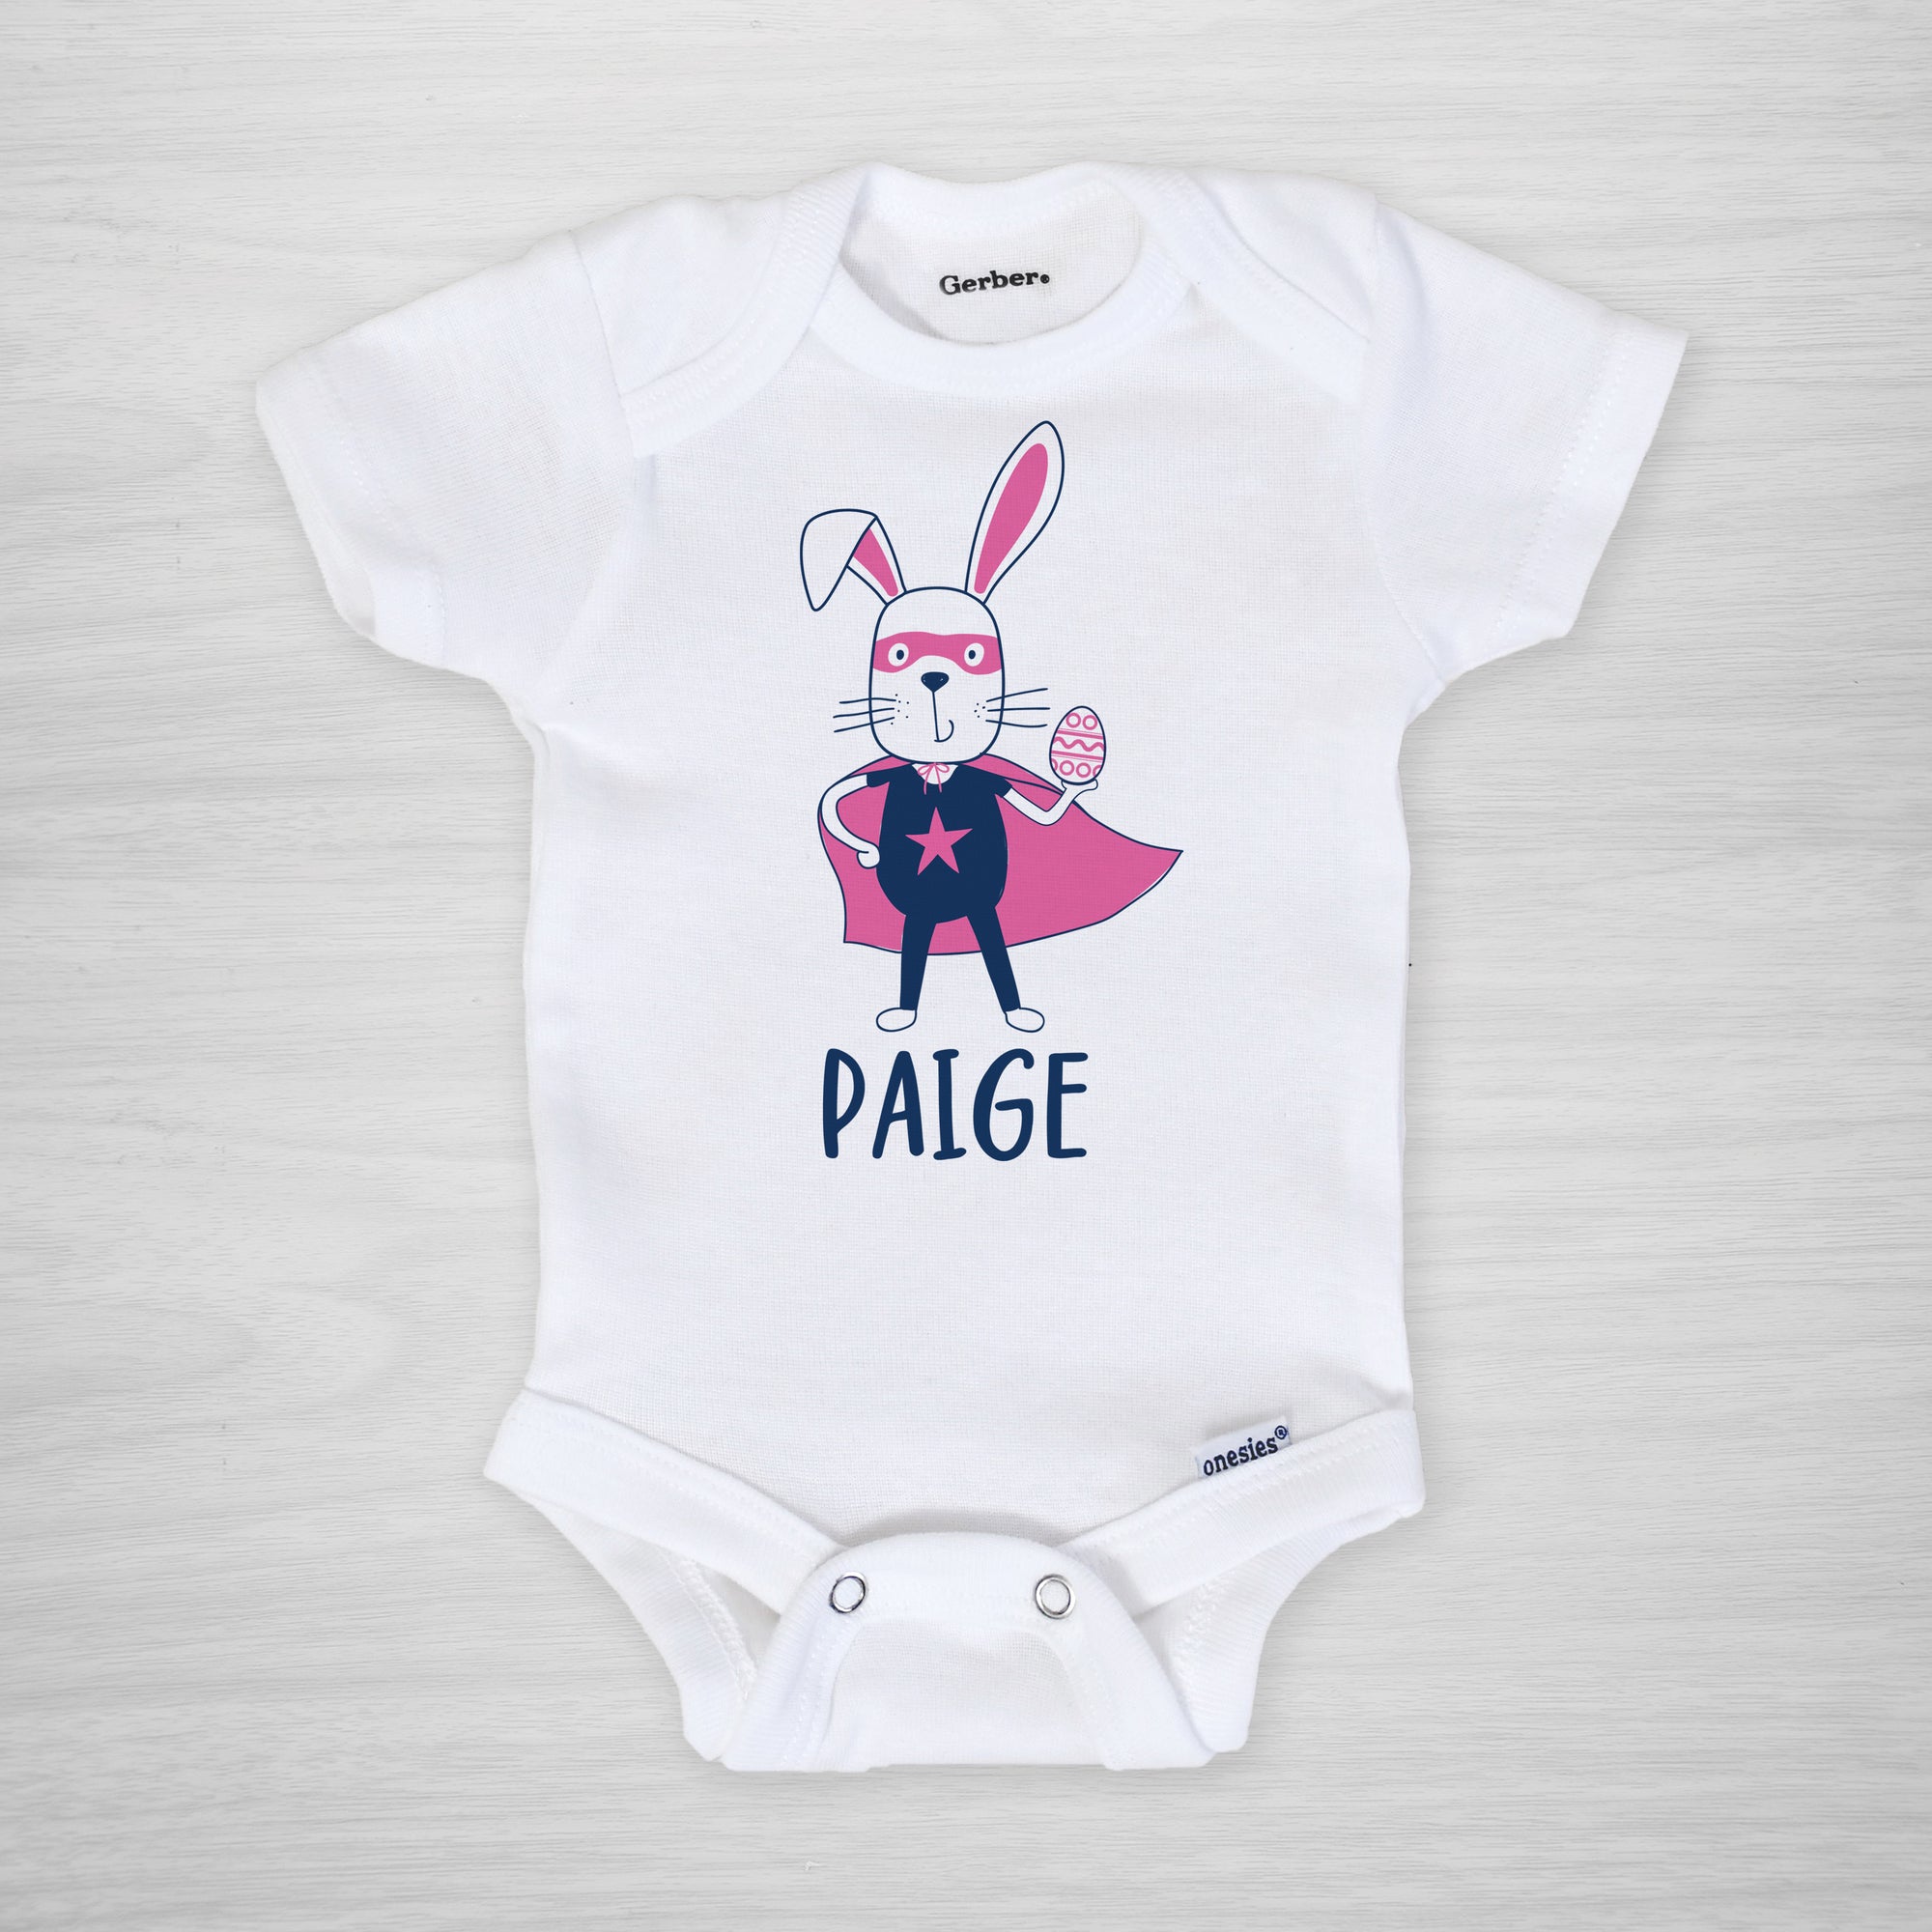 Superhero Easter Bunny with a cape, mask, and egg on this personalized Gerber Onesie®, short sleeved pink